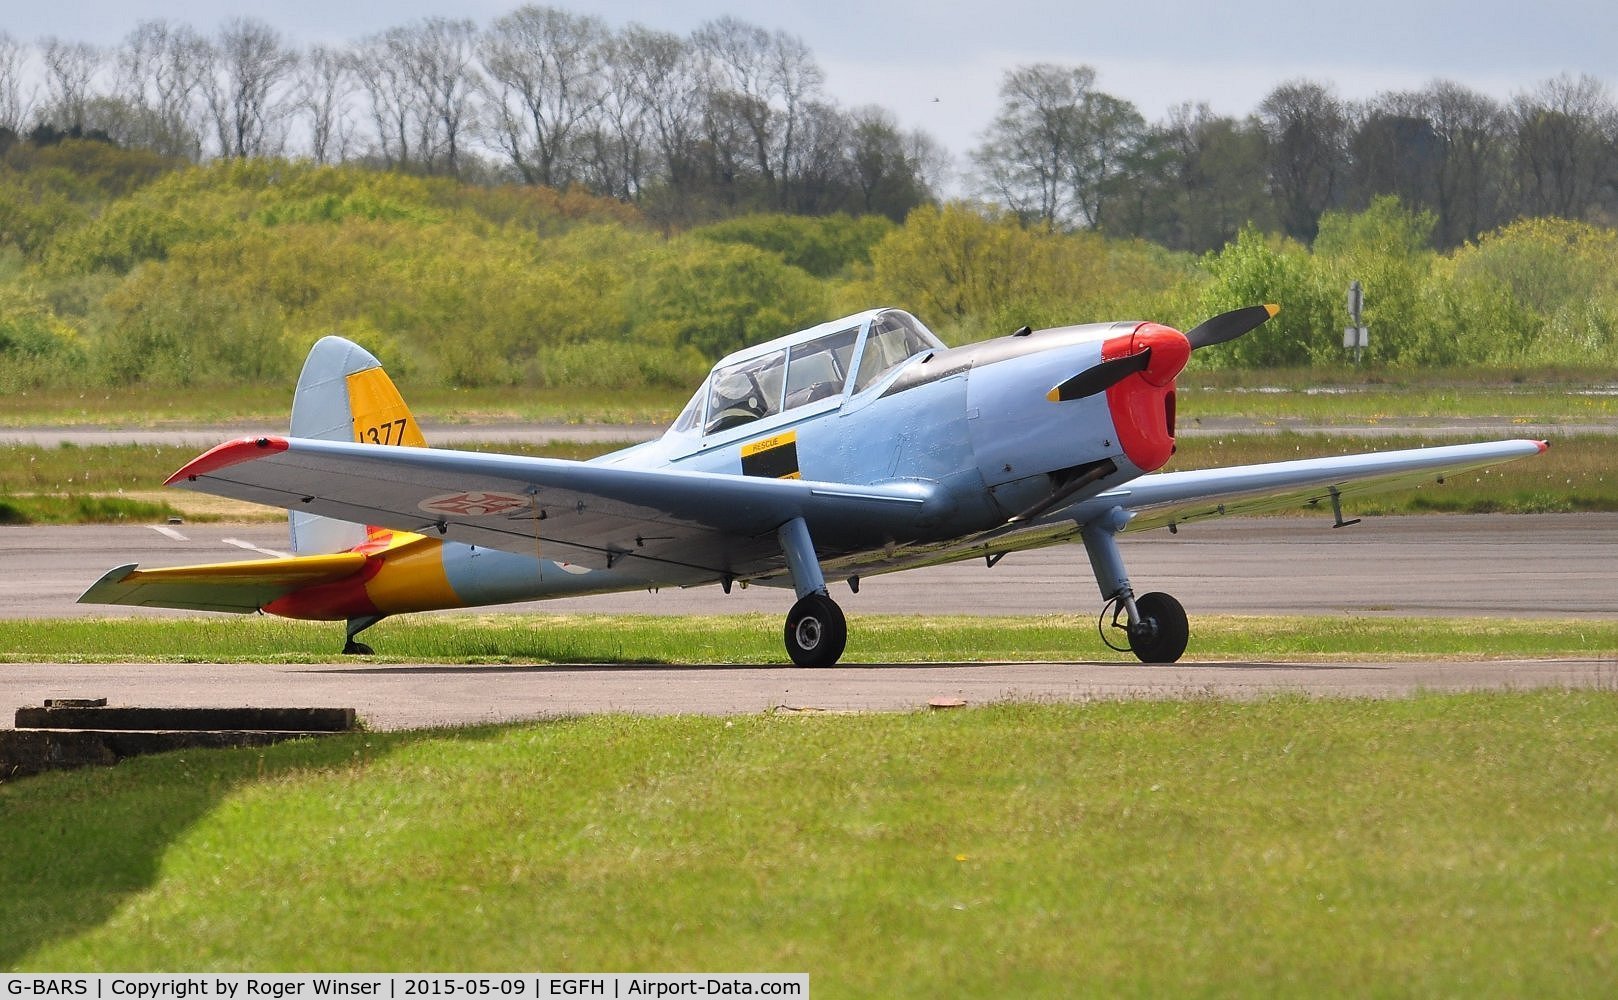 G-BARS, 1952 De Havilland DHC-1 Chipmunk T.10 C/N C1/0557, Visiting Chipmunk aircraft in Portuguese Air Force markings and s/n 1377. Previously WK520 in RAF service.